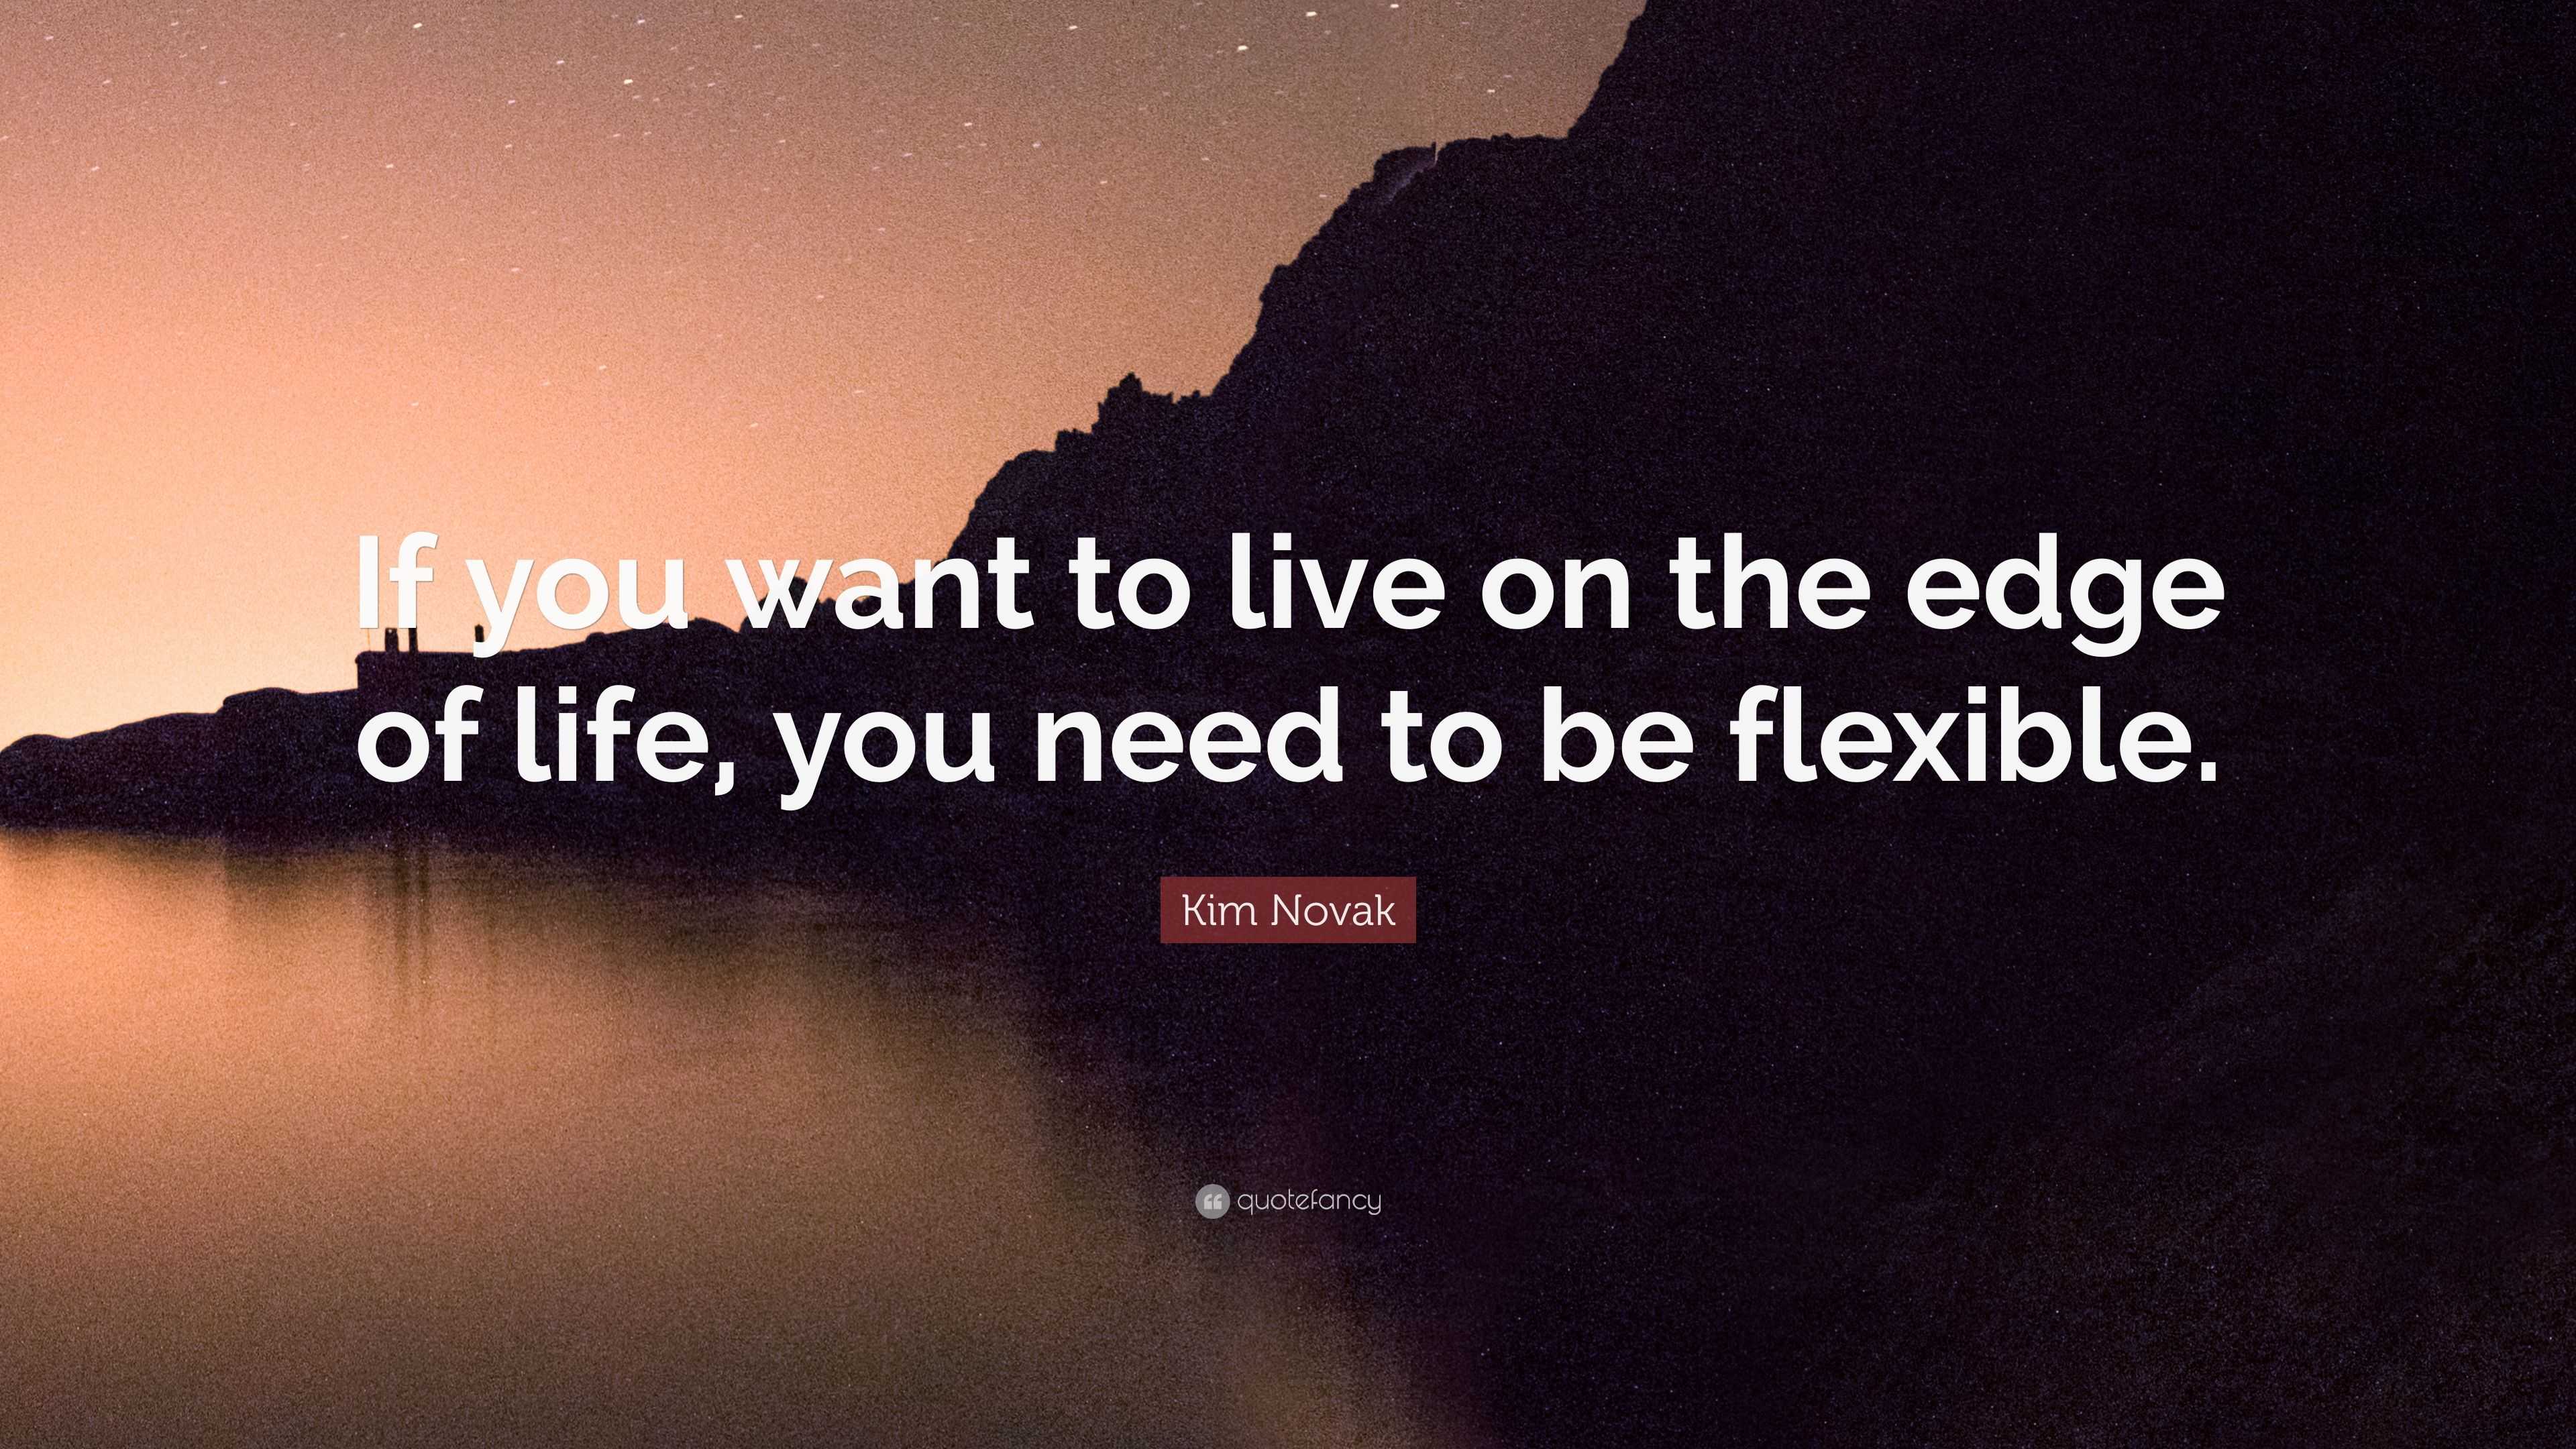 Kim Novak Quote If You Want To Live On The Edge Of Life You Need To Be Flexible 7 Wallpapers Quotefancy